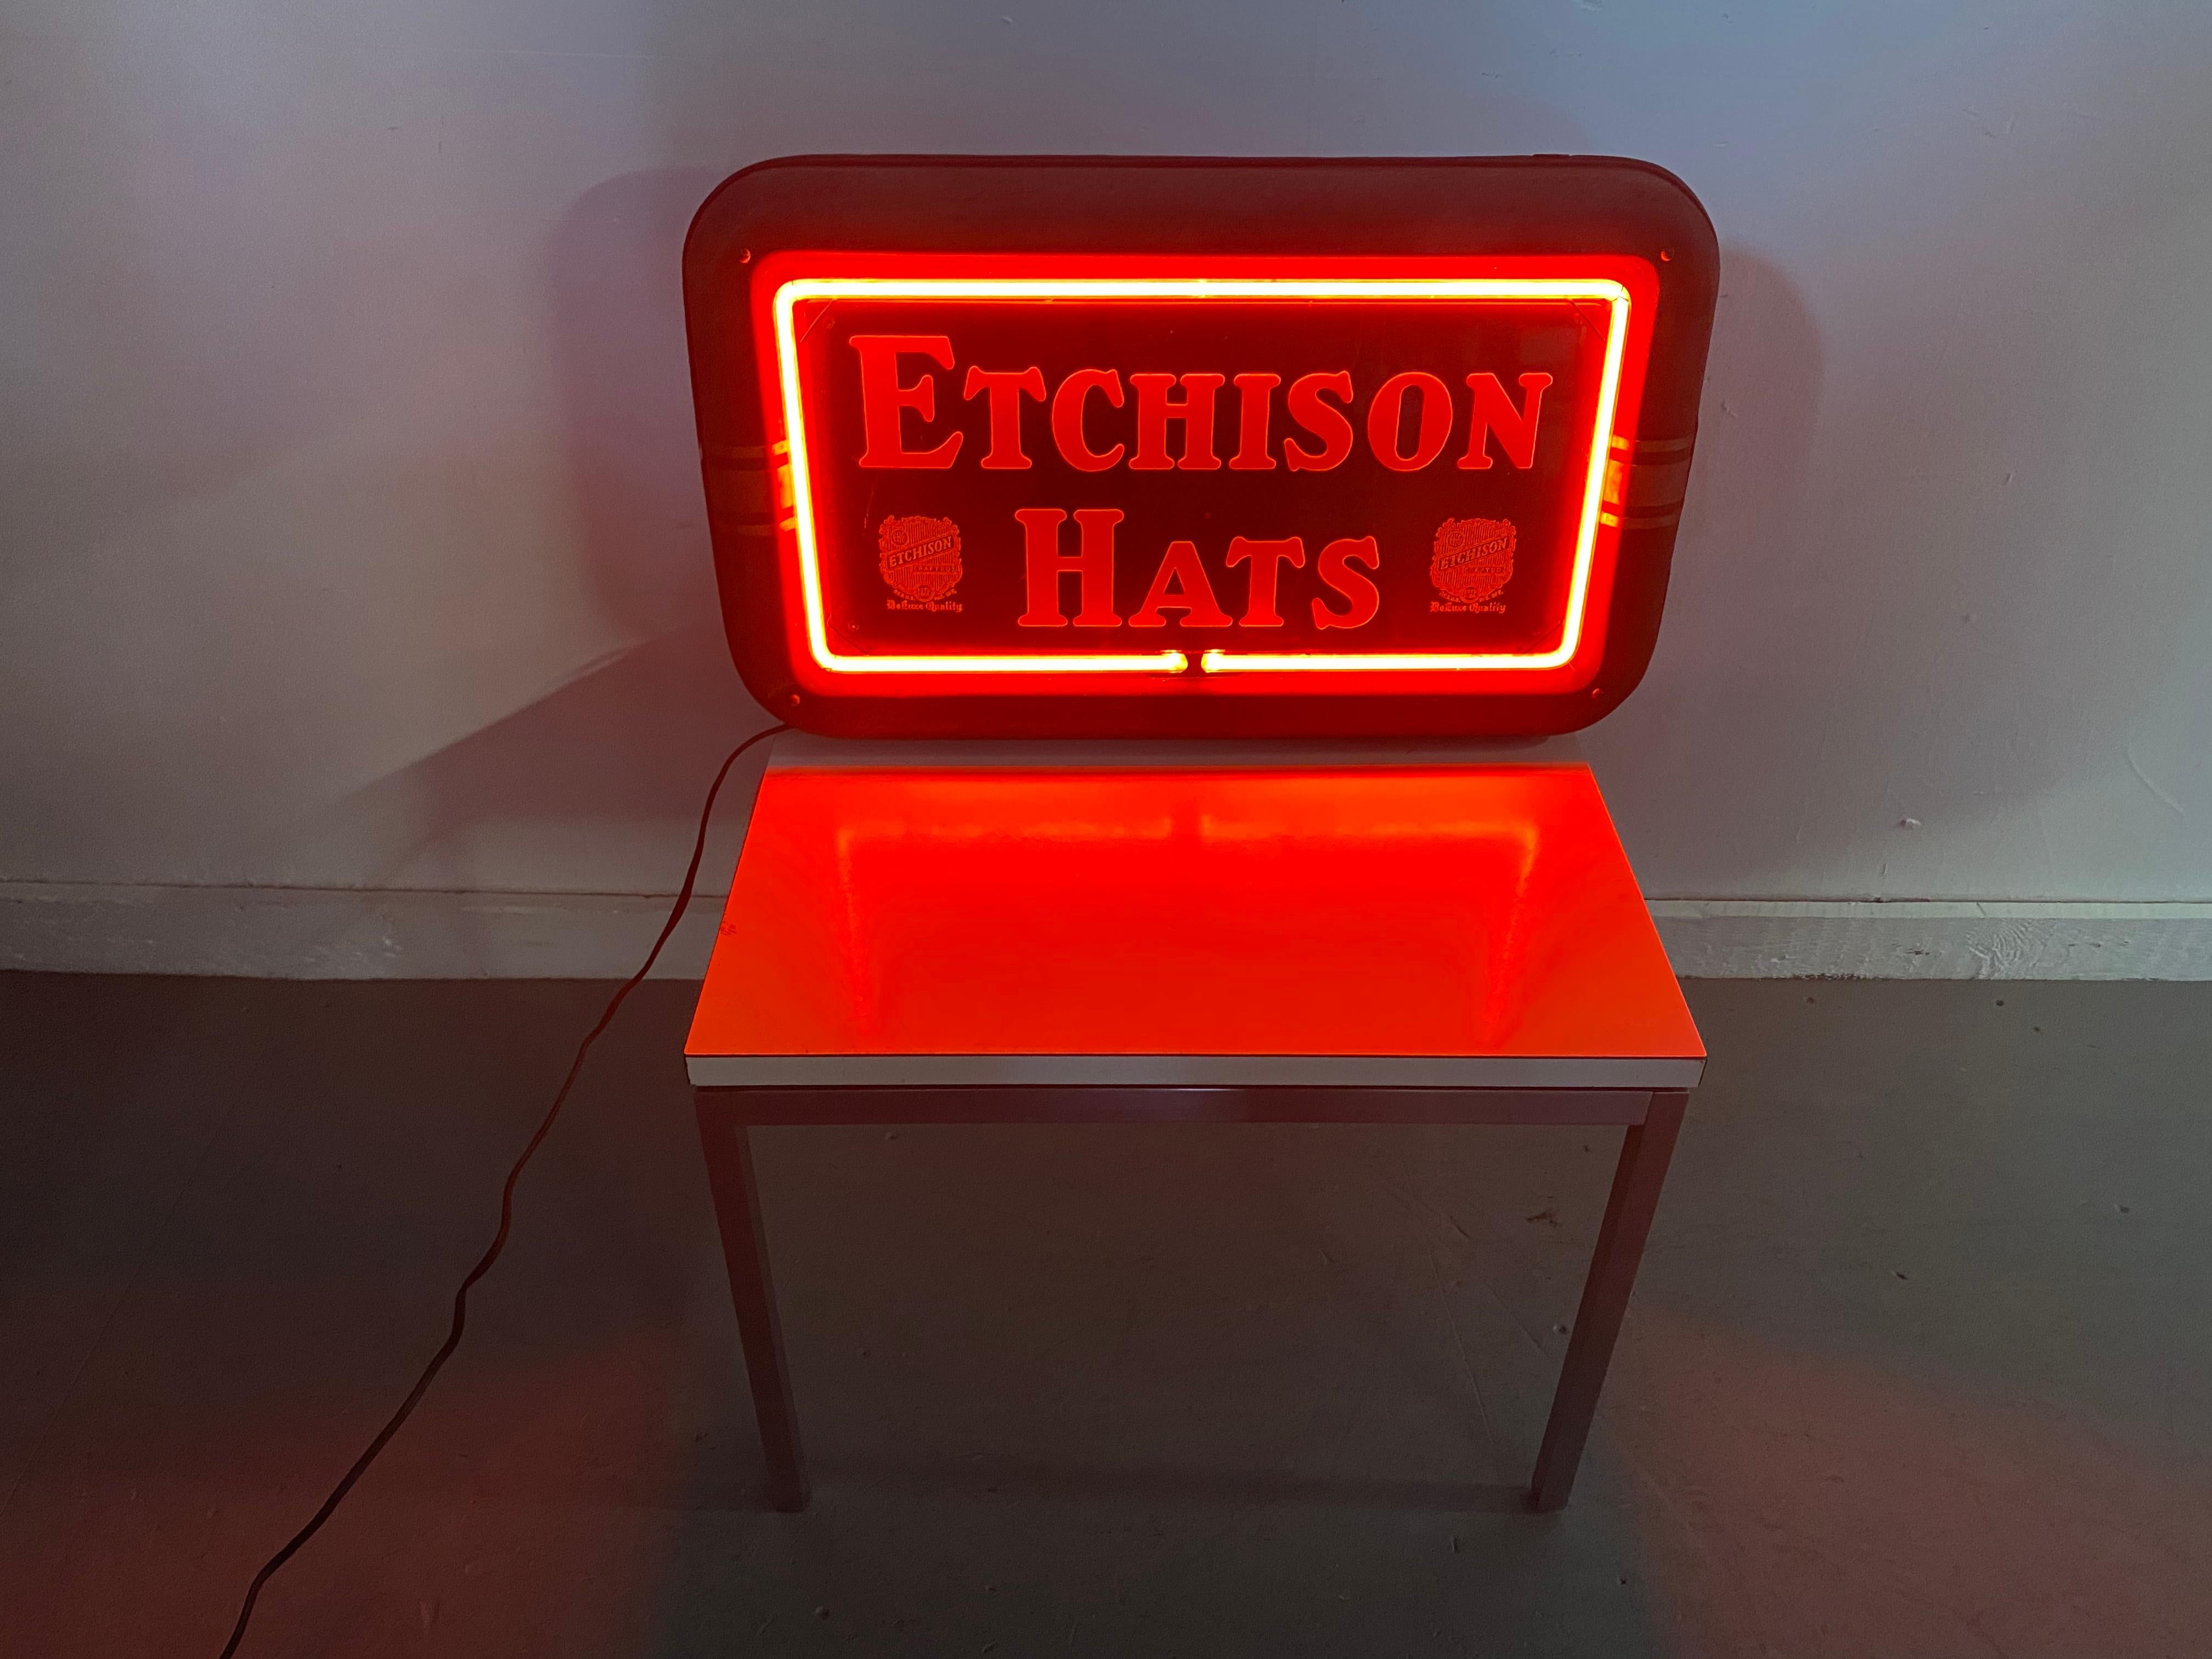 Art Deco Box Neon sign advertizing Etchison Hats,c.1930's,, wonderful red neon, made by The Neon Shop.Lima Ohio.. Great graphics..retains original black metal housing.. curved deco design speed lines.. Red neon appears to be original..